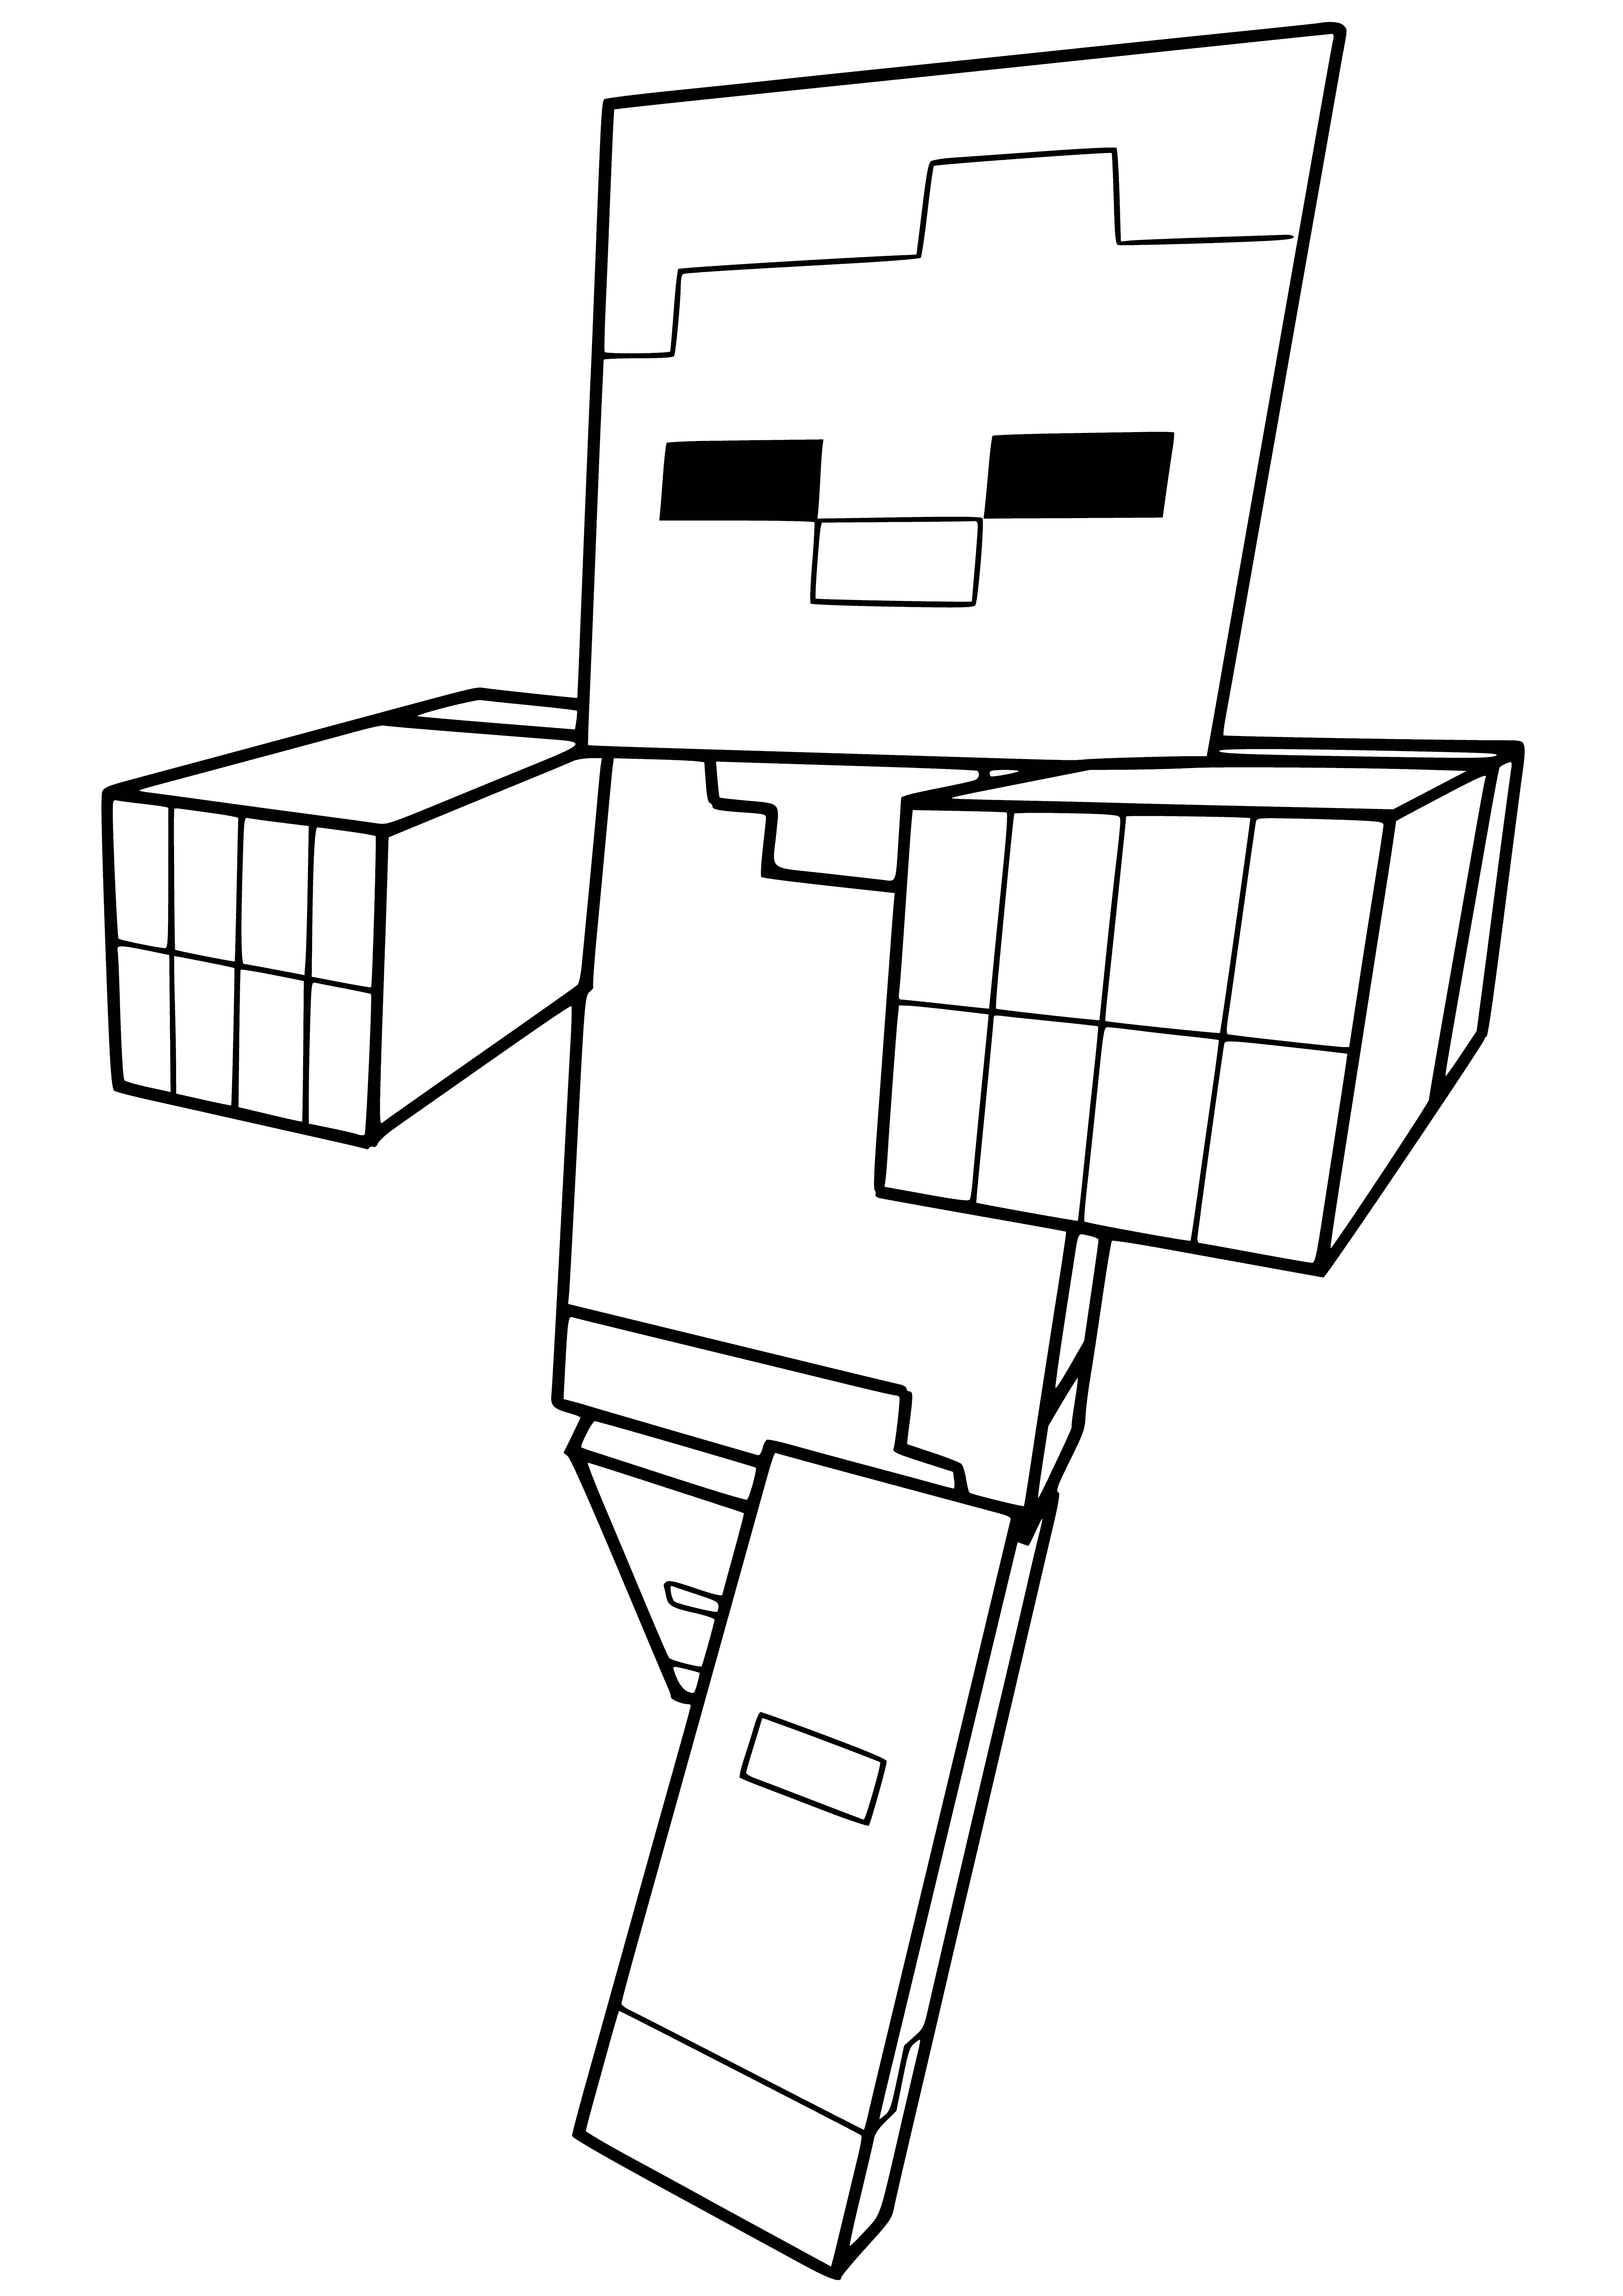 Zombie Mancraft coloring page